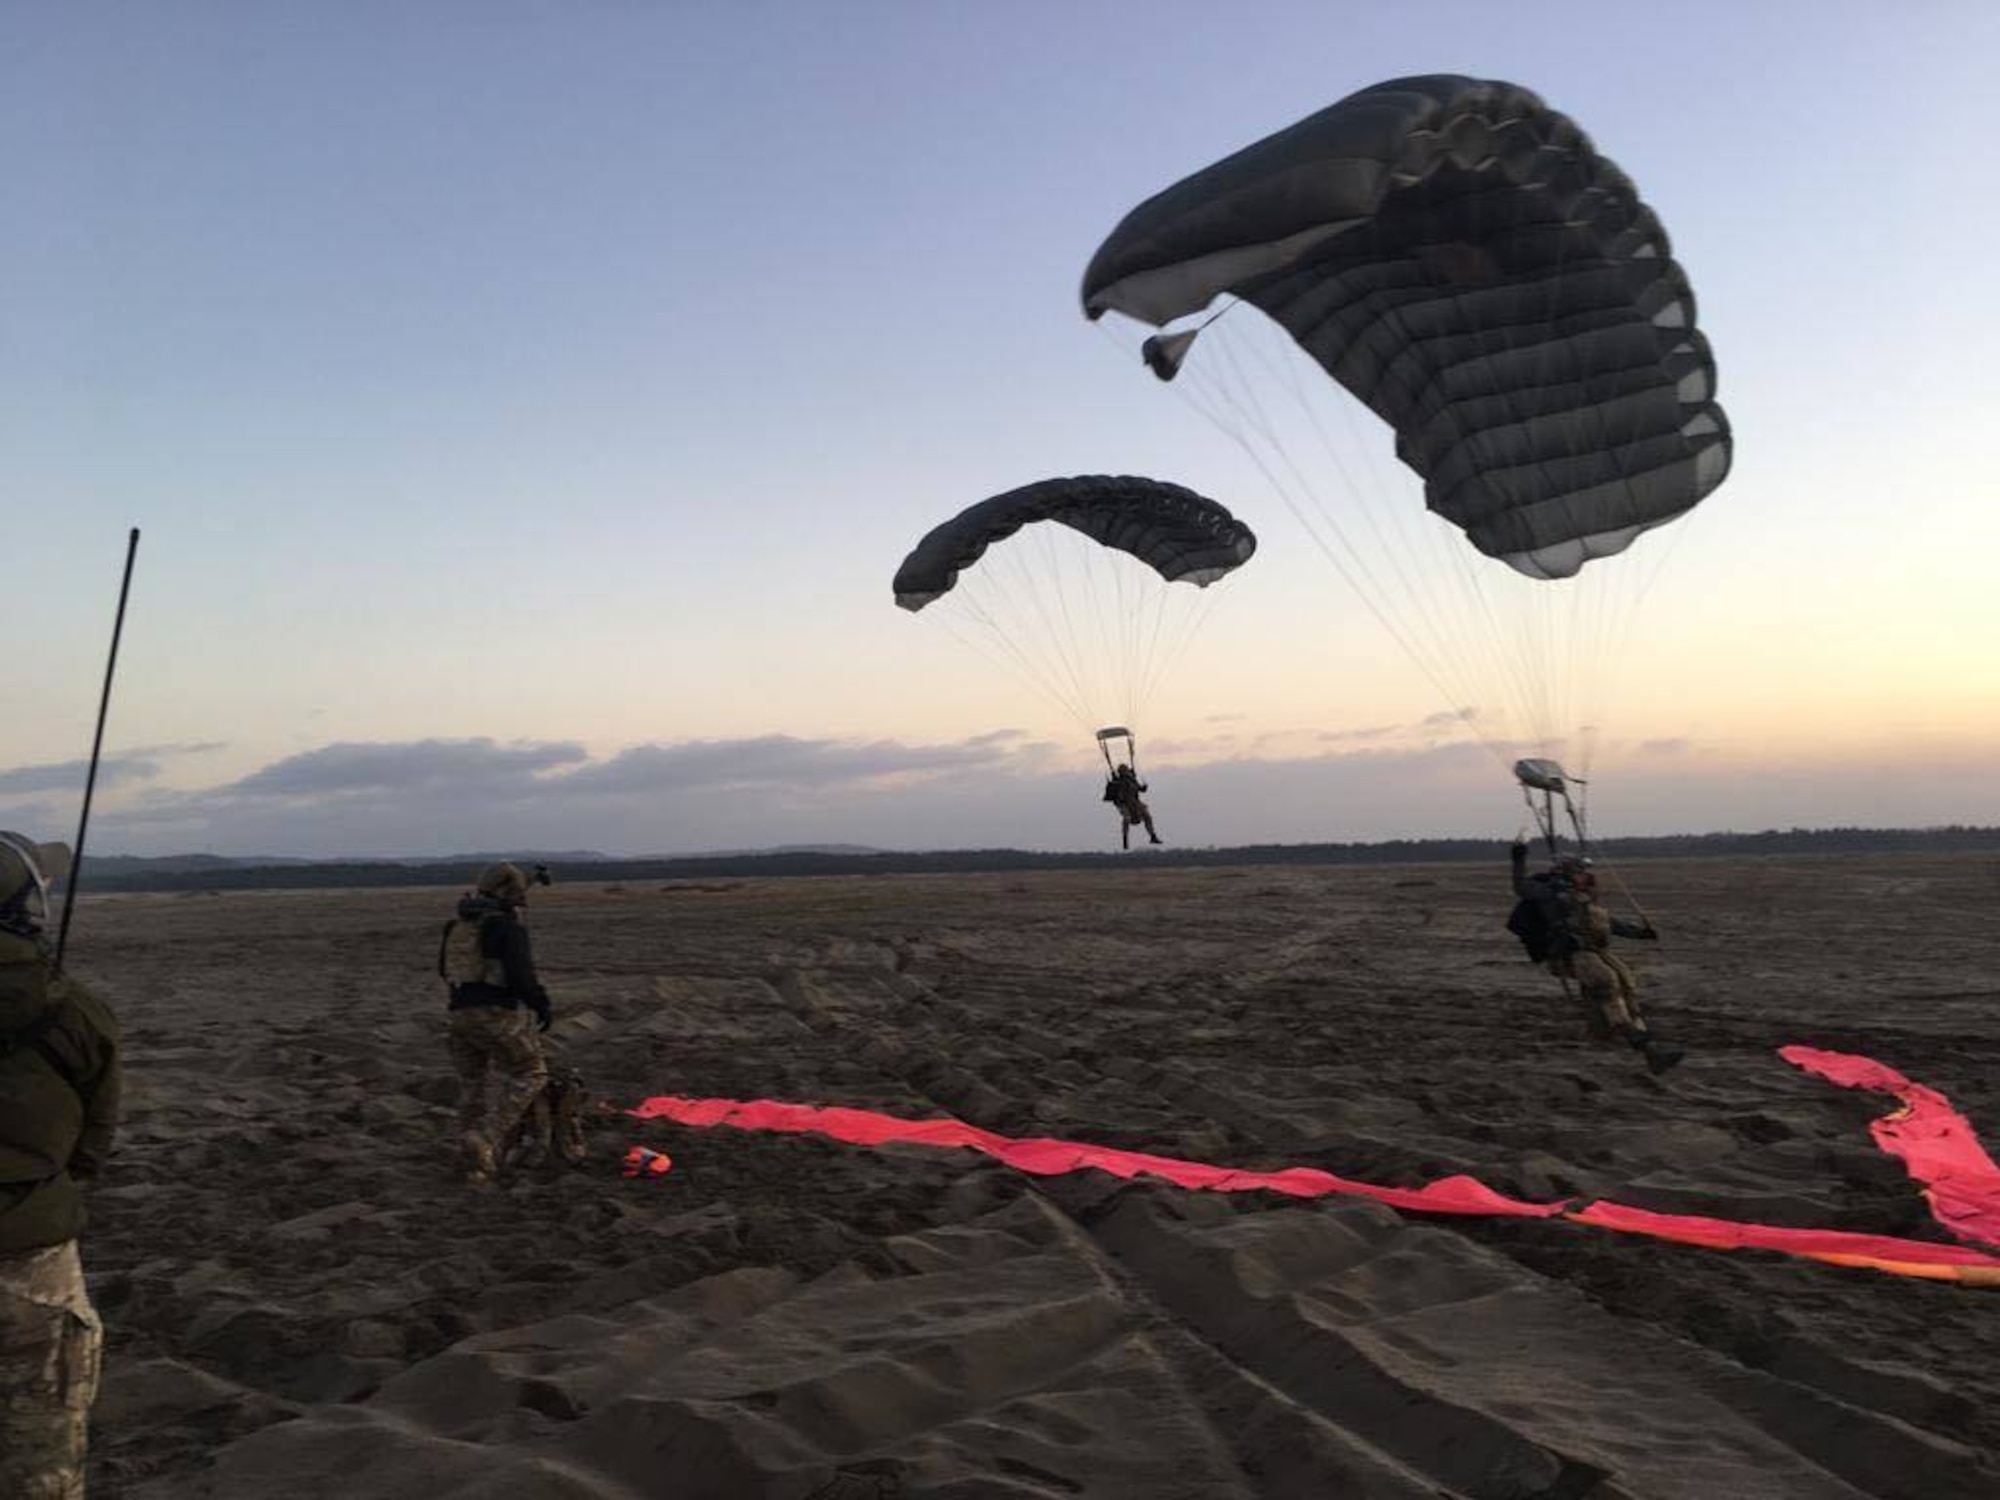 Combat controllers from the U.S. and Polish forces conduct a military free fall during a culmination exercise near Krakow on Dec. 5, 2018.